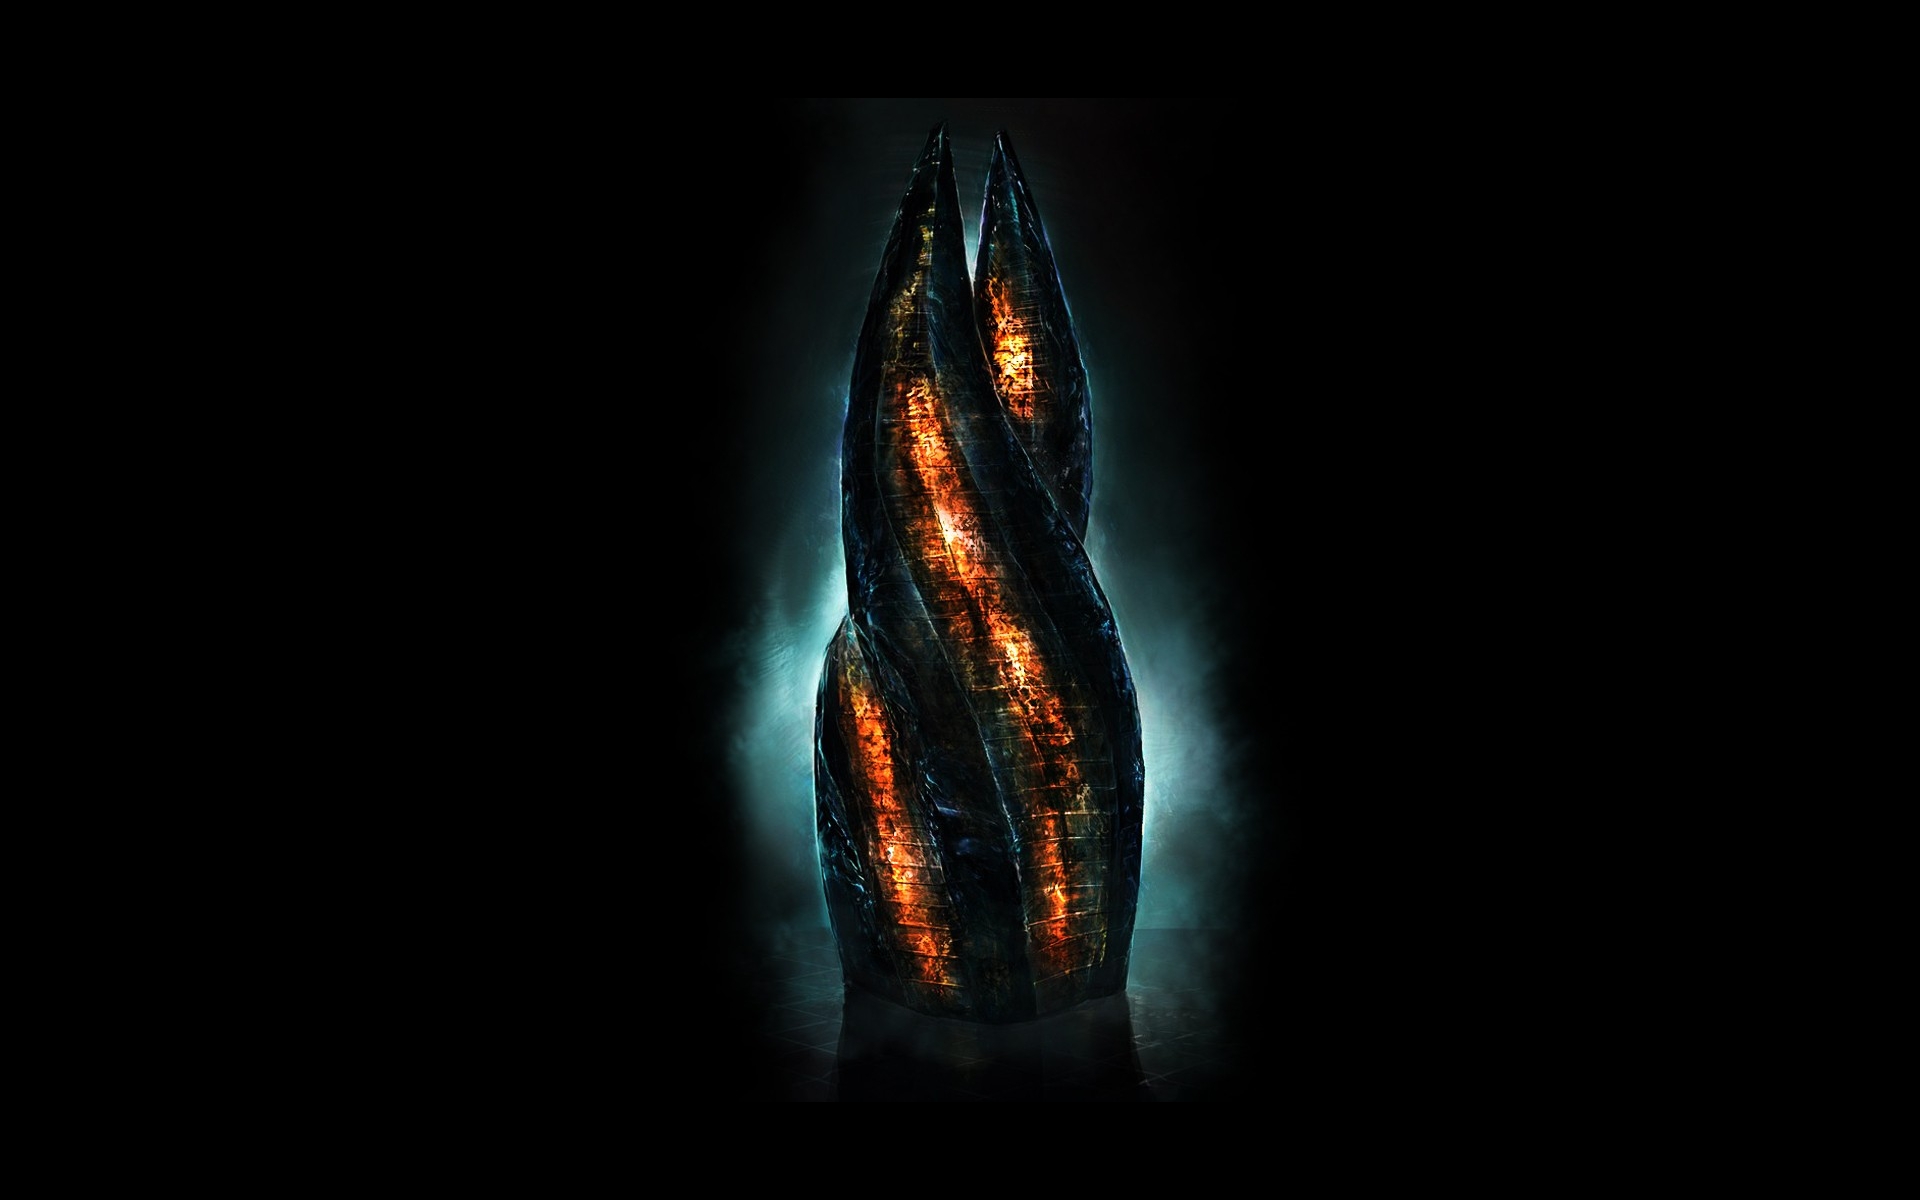 Video Game Dead Space HD Wallpaper | Background Image